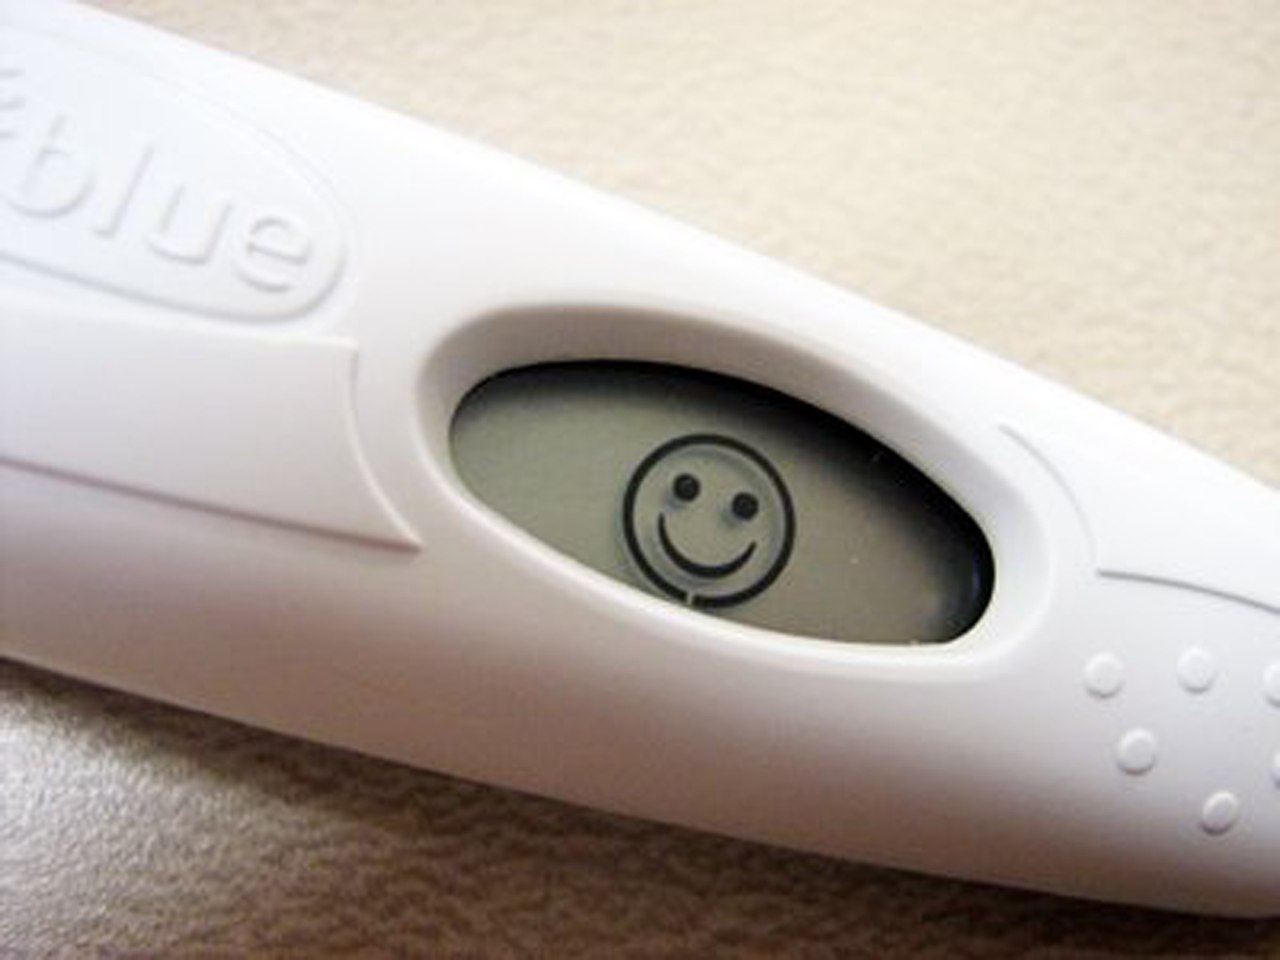 The first pregnancy test was strange but accurate